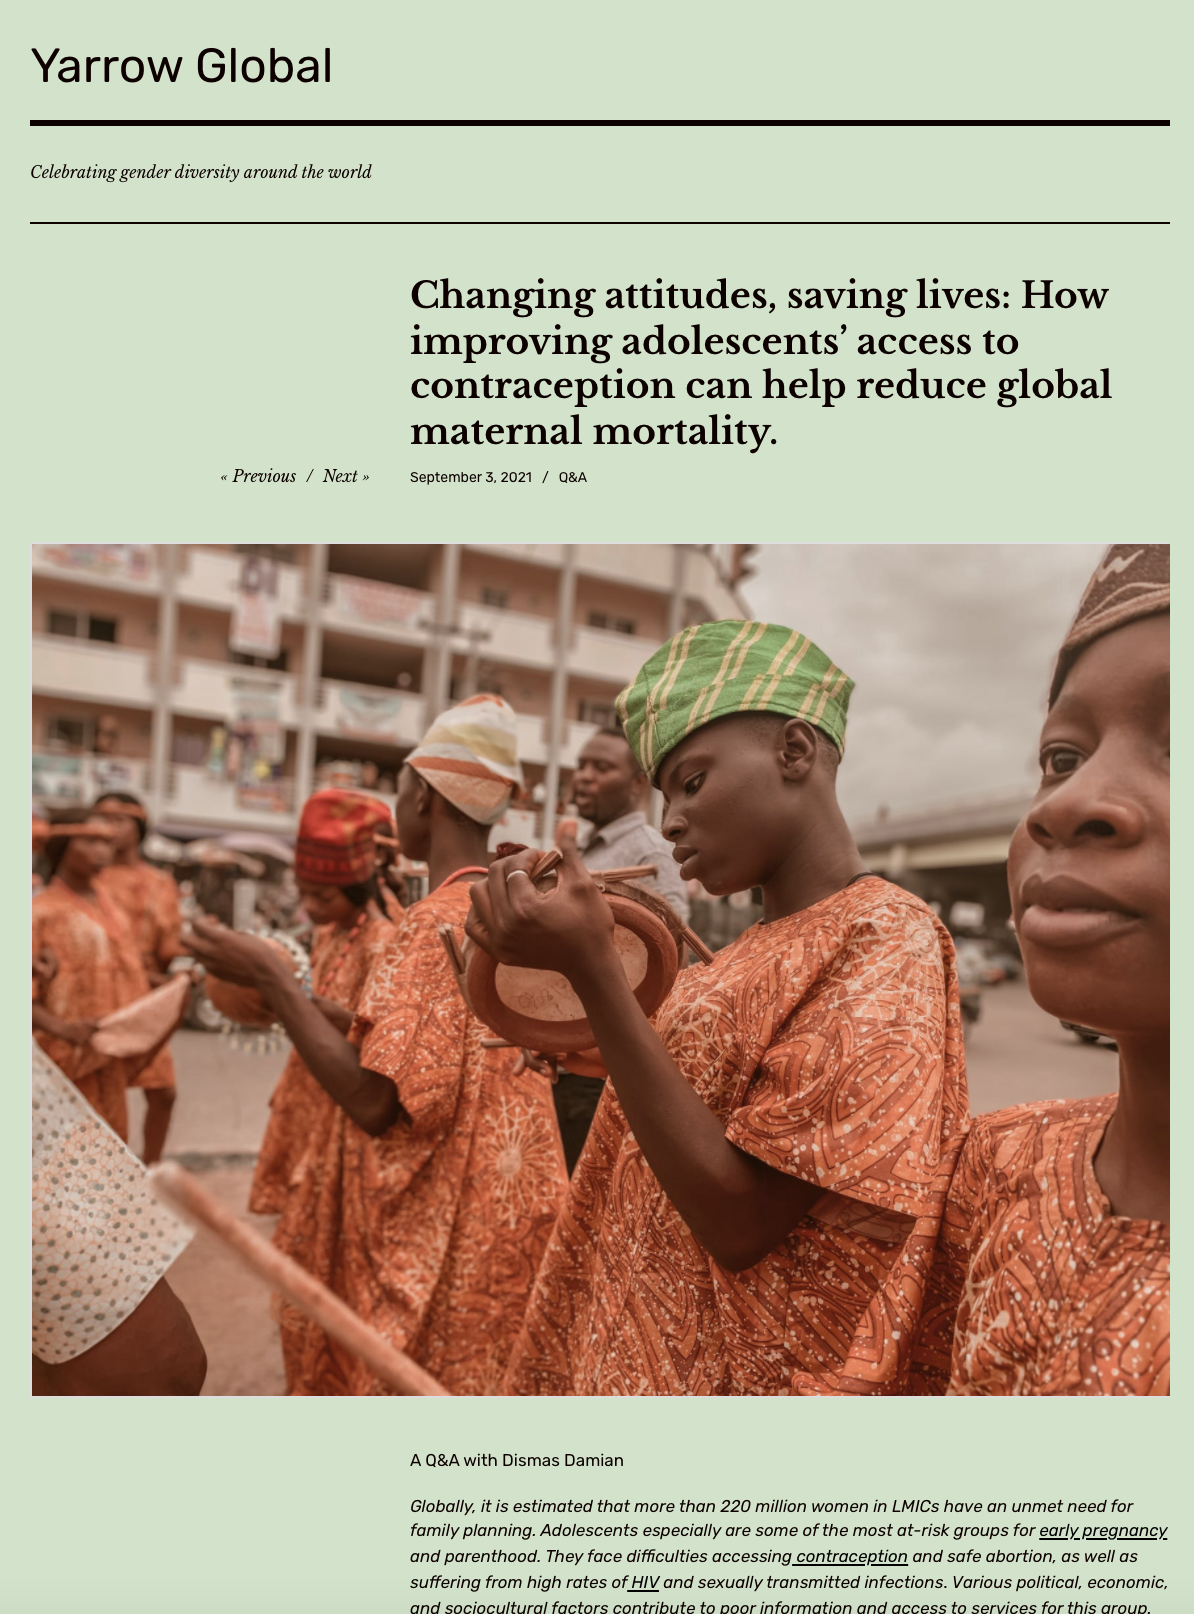 Changing attitudes, saving lives: How improving adolescents’ access to contraception can help reduce global maternal mortality.